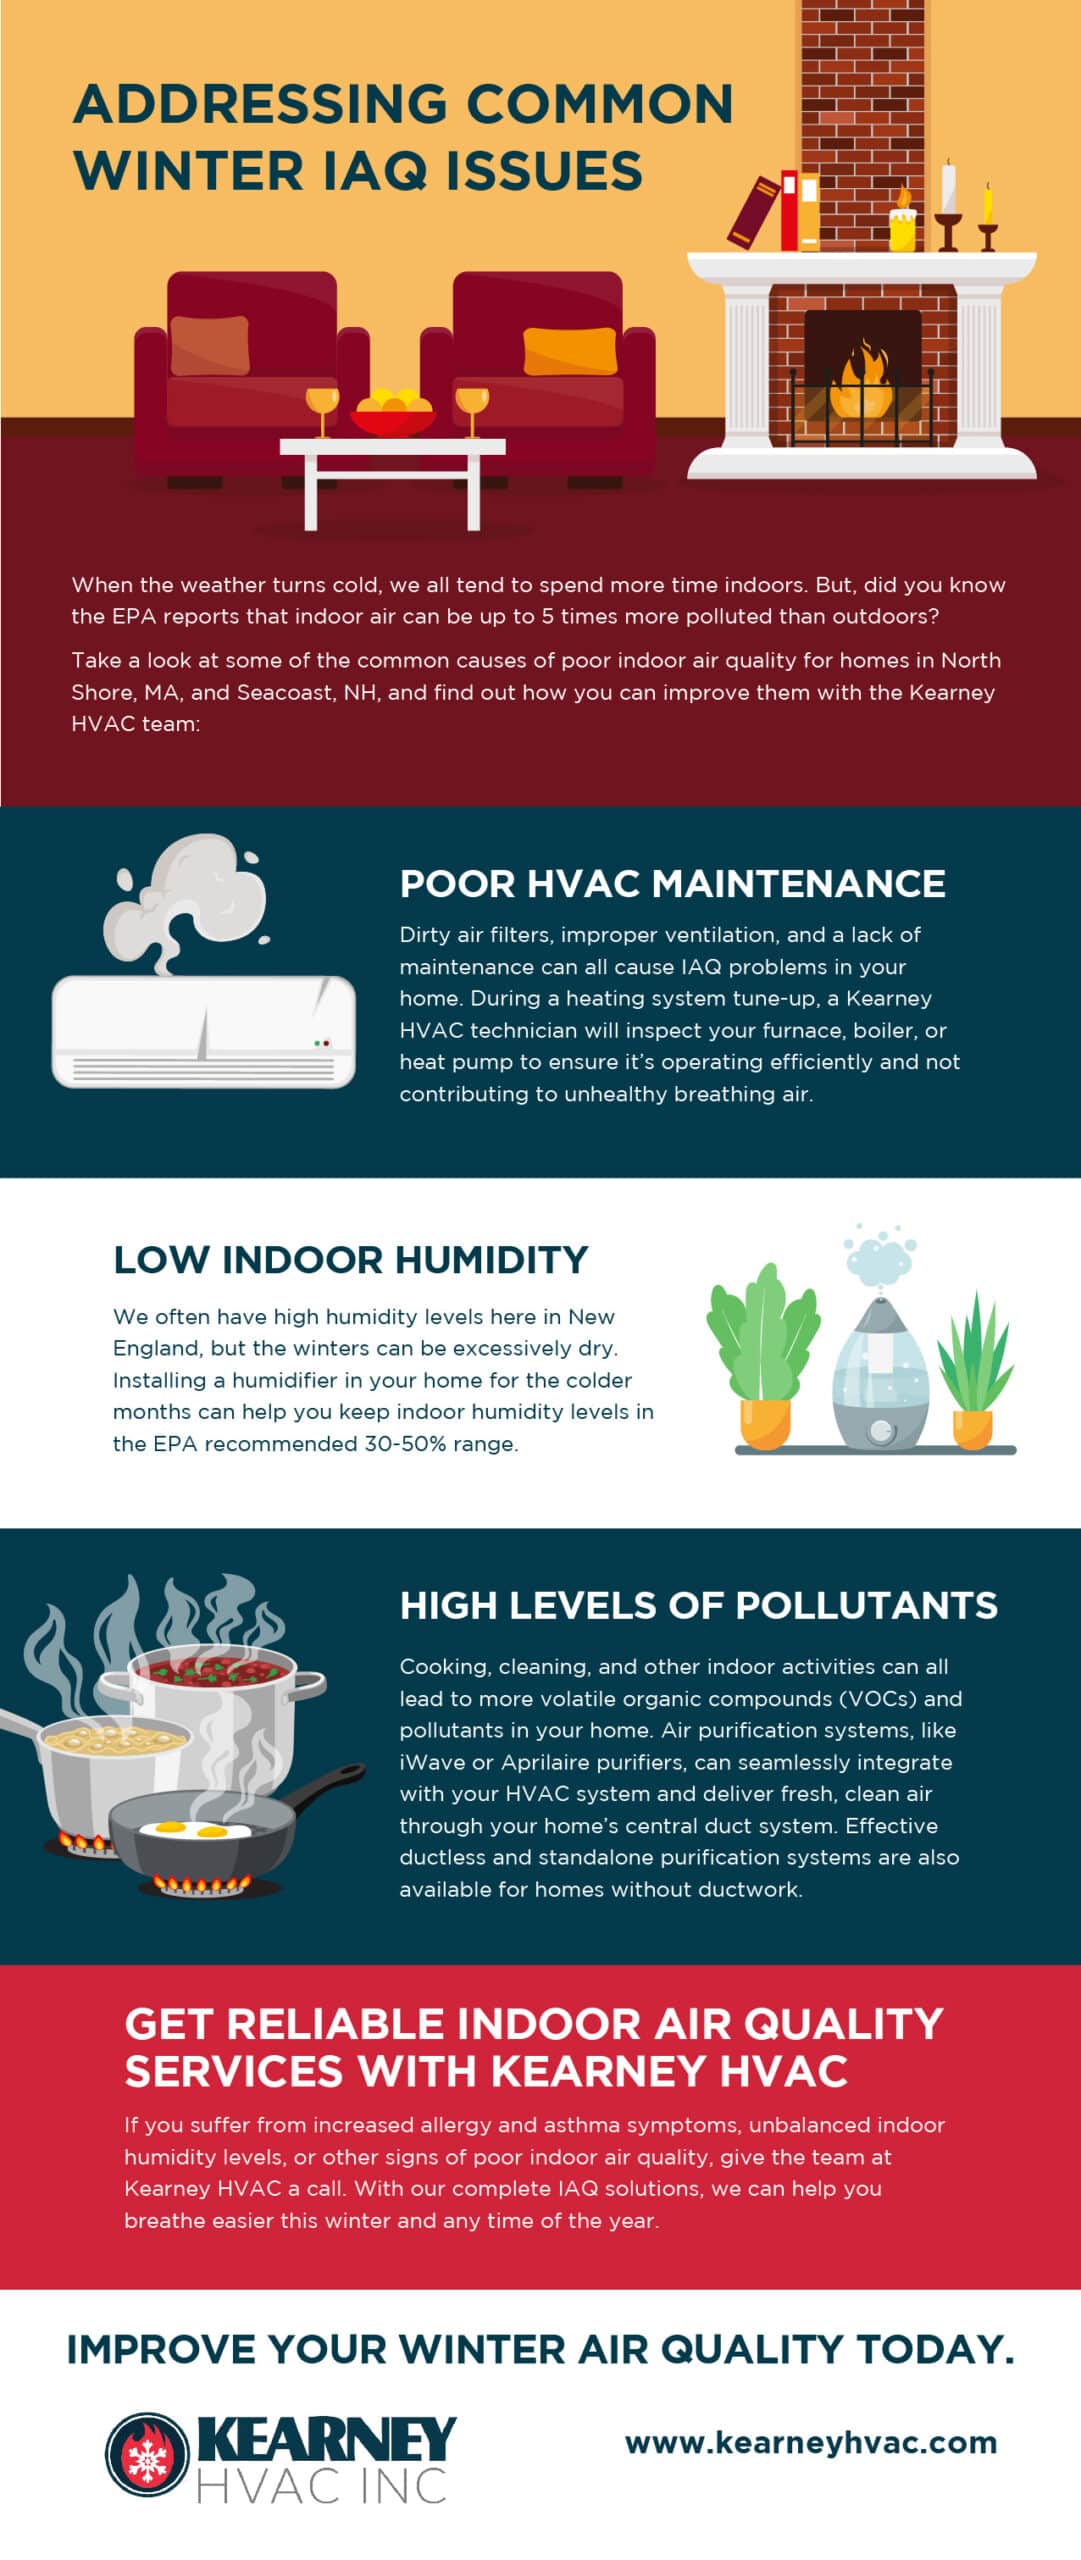 Addressing Common Winter IAQ Issues infographic